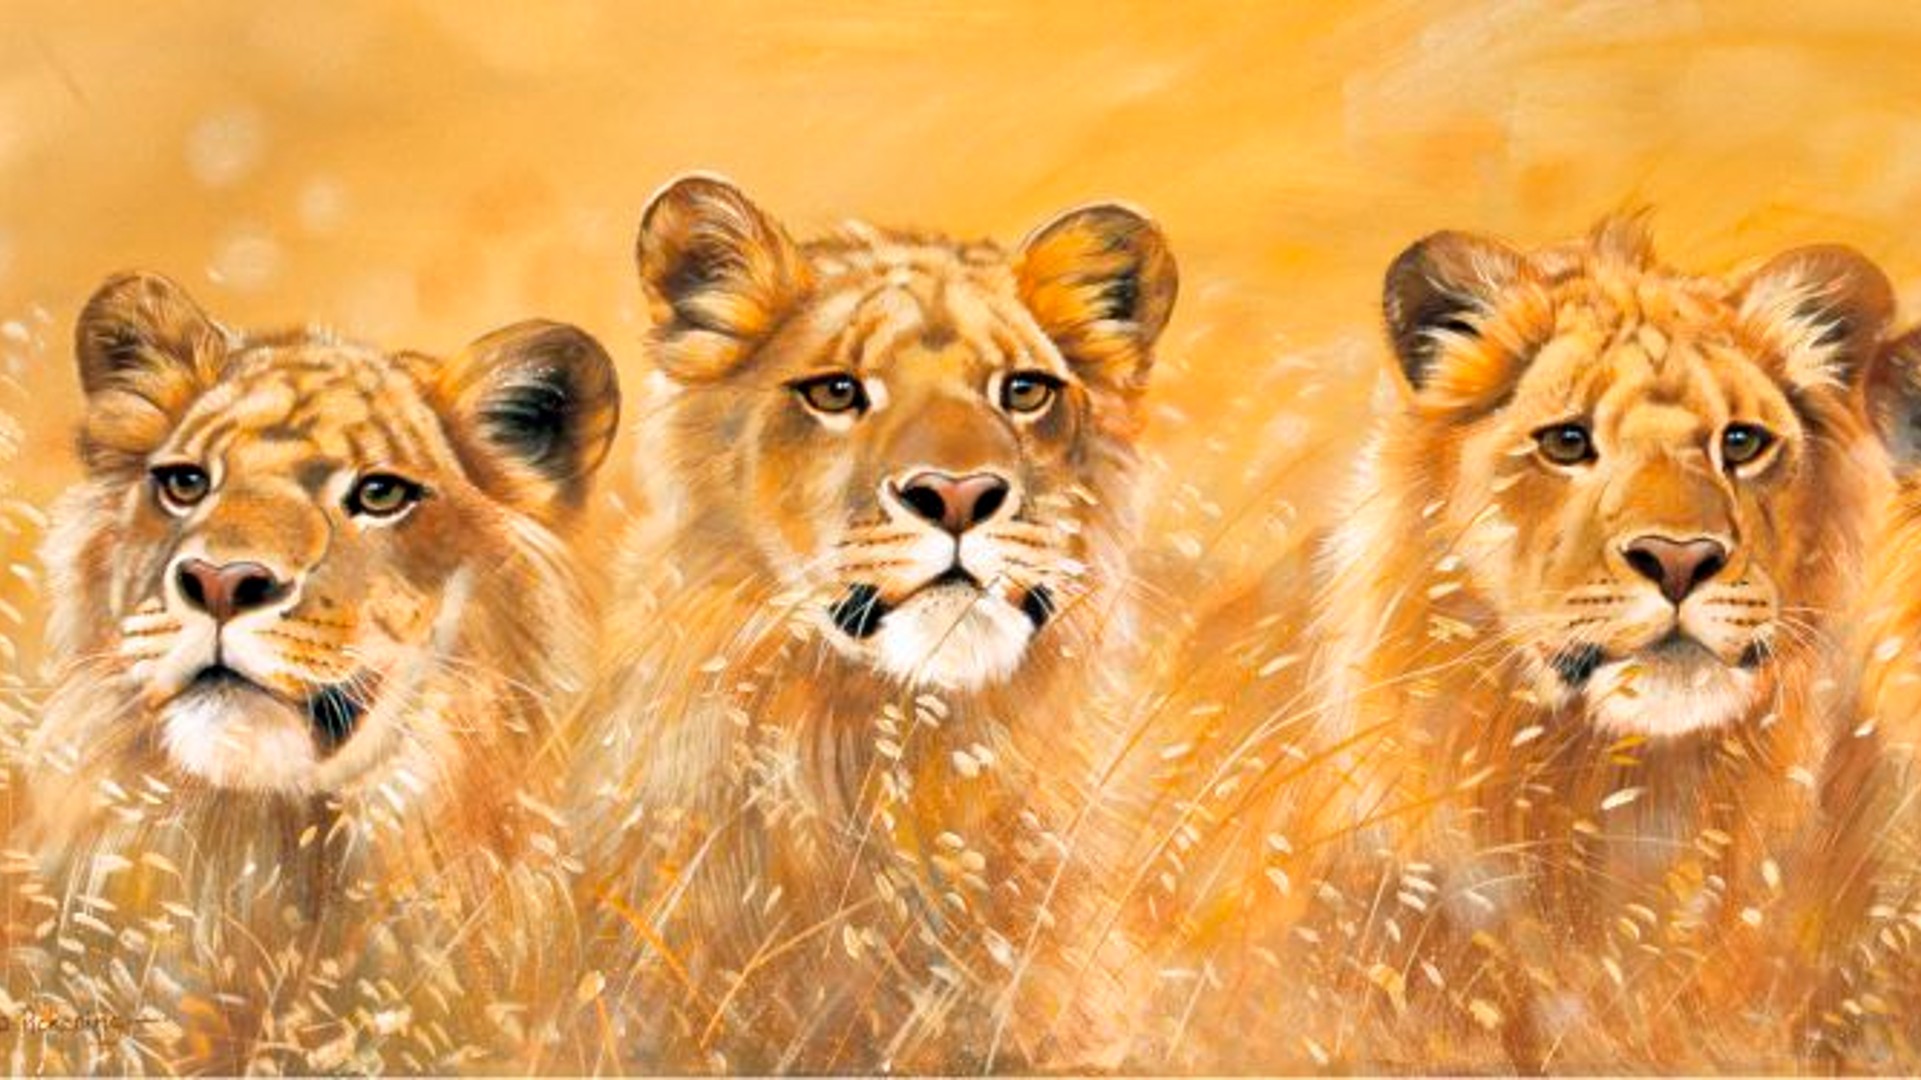 A painting showing three lionesses peeking out from behind long grass